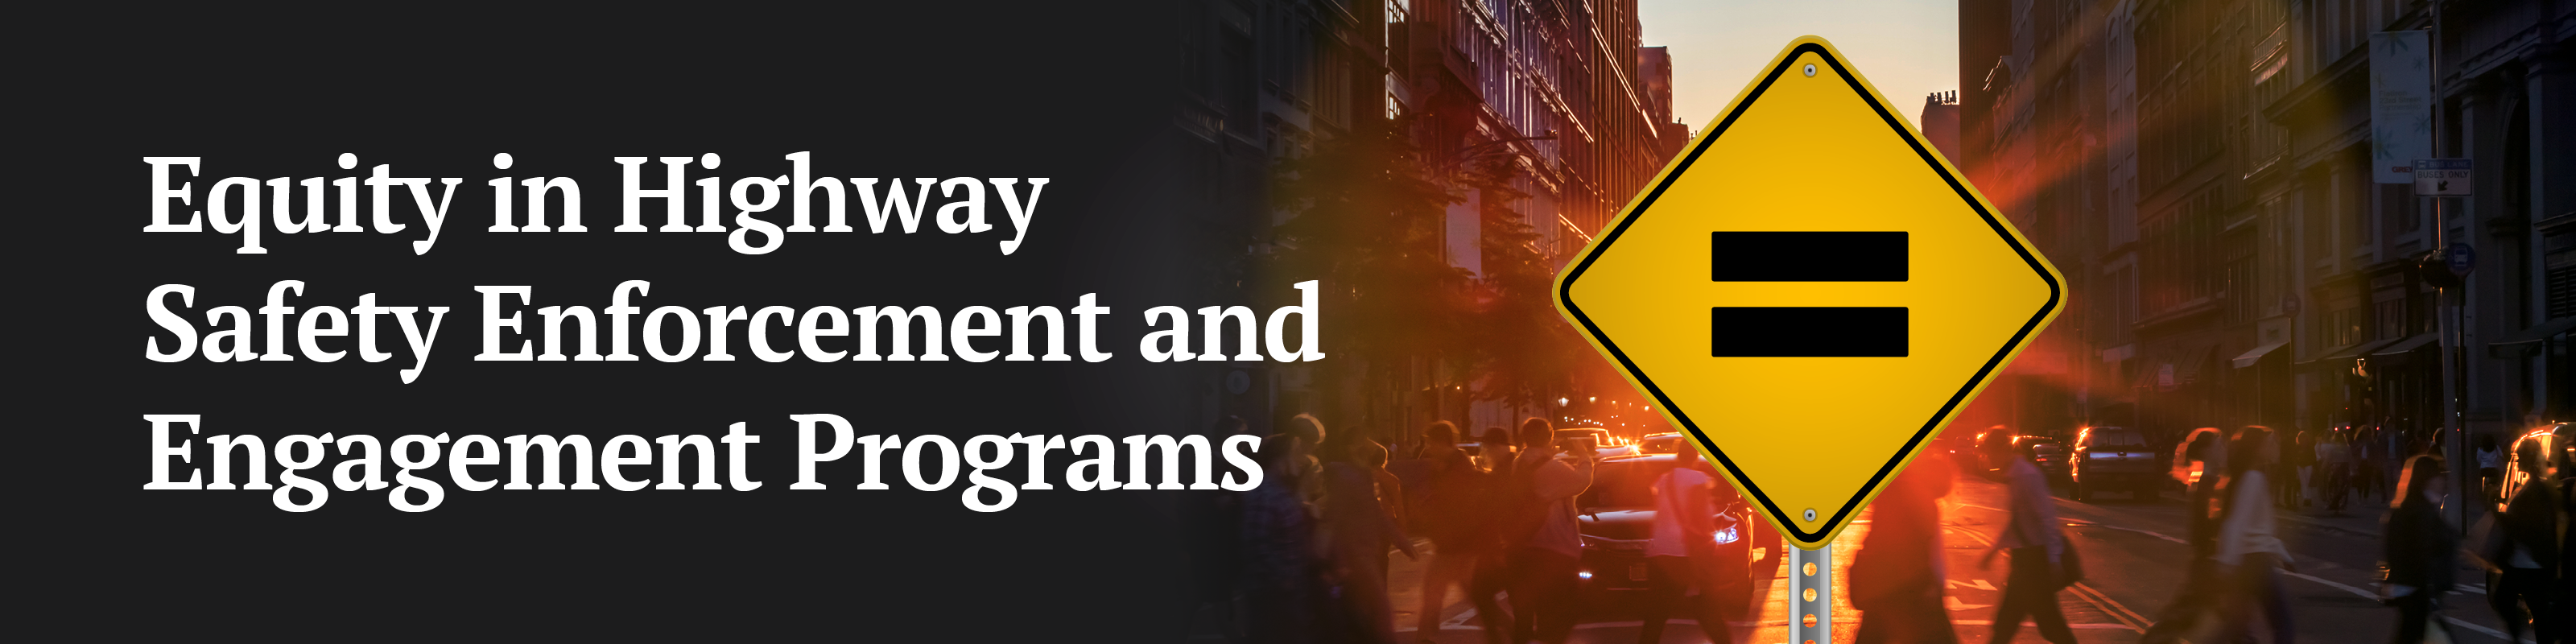 Equity in Highway Safety Enforcement and Engagement Programs